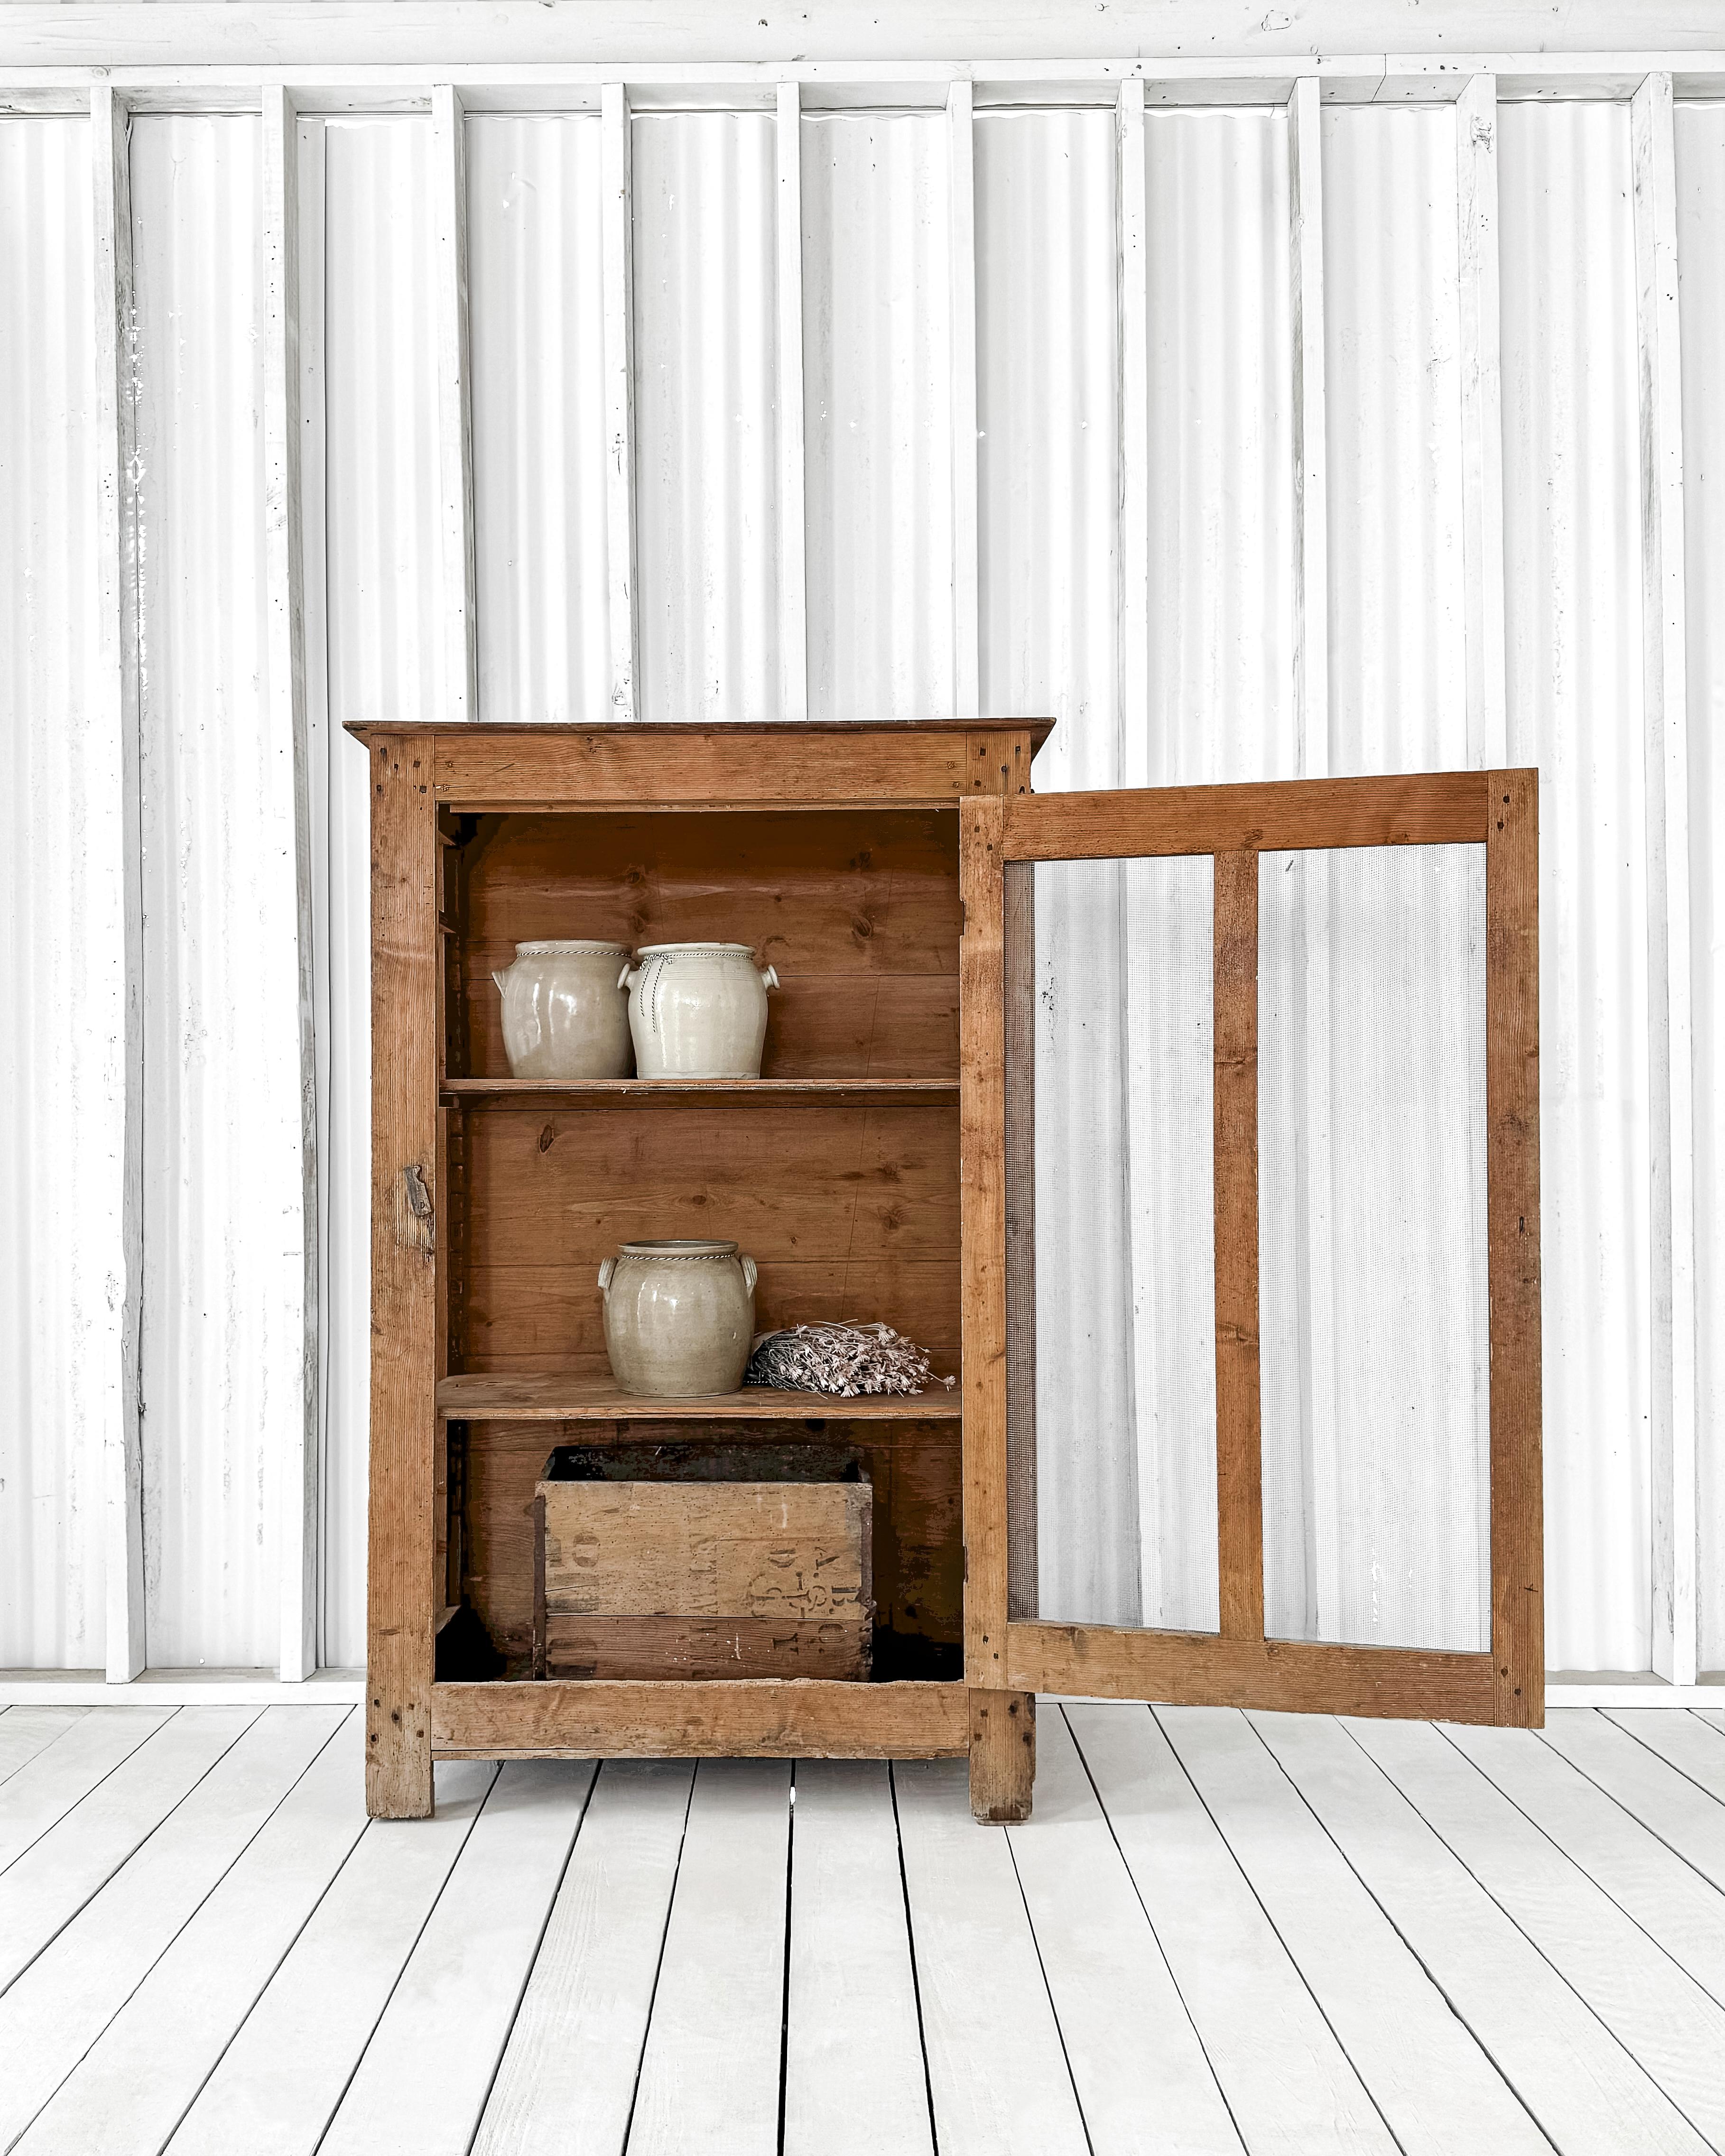 A charming primitive pine cupboard, crafted with a timeless design and exceptional durability. Constructed from solid pine using traditional pegged joinery techniques, this cupboard exudes strength and authenticity. The natural scrubbed finish